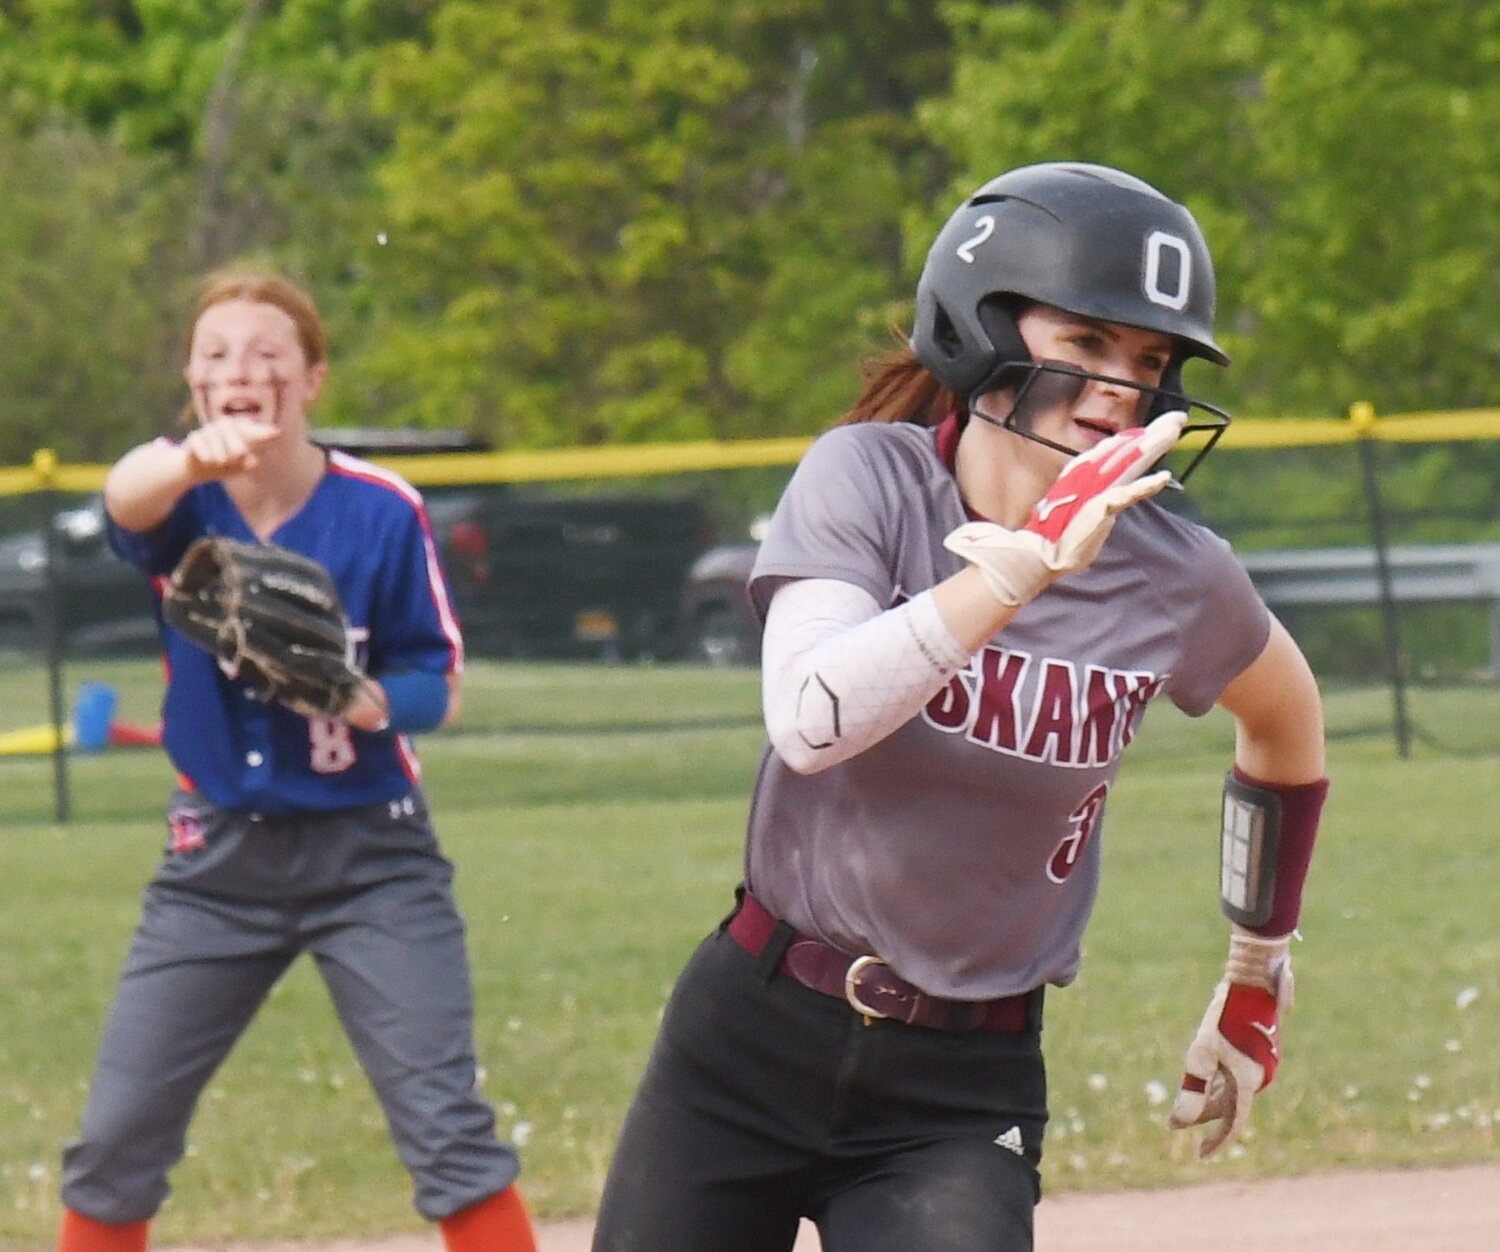 Oriskany's Brooke Matys turns around second base during her team's game against Poland. Mattys was 2-for-3 with a double, triple and a RBI in the 3-2 win.